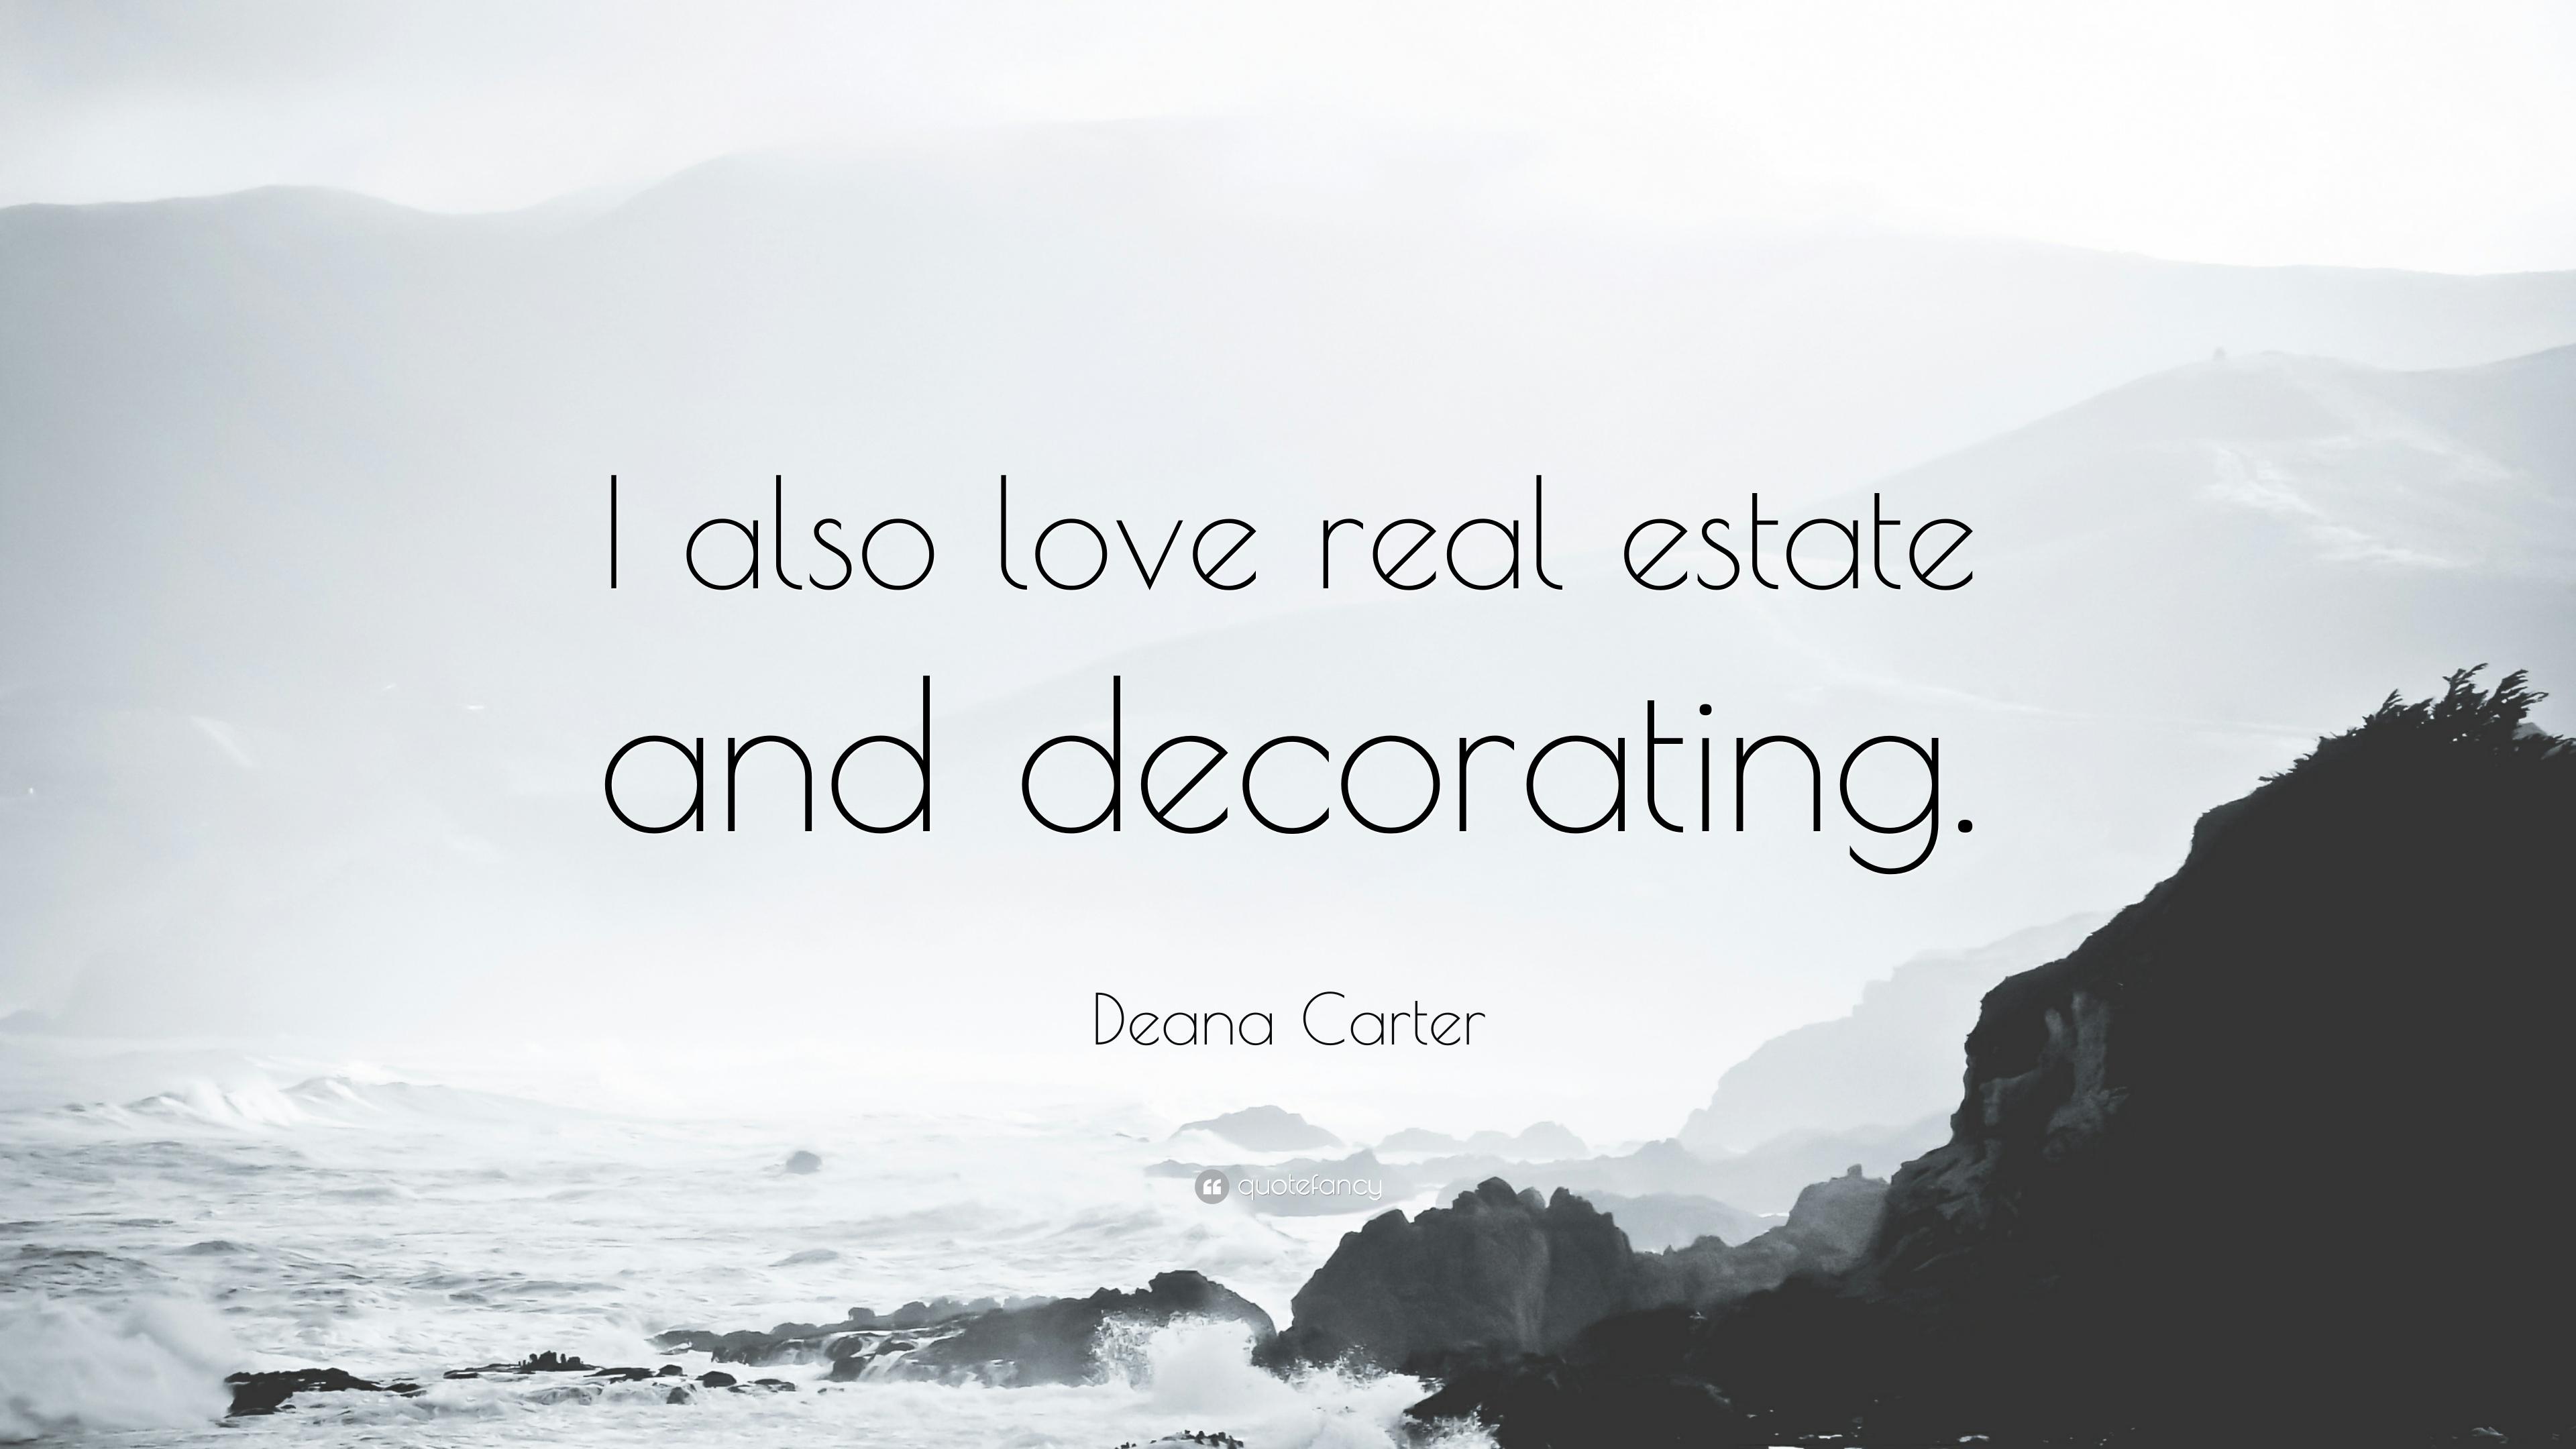 Deana Carter Quote: “I also love real estate and decorating.” 7